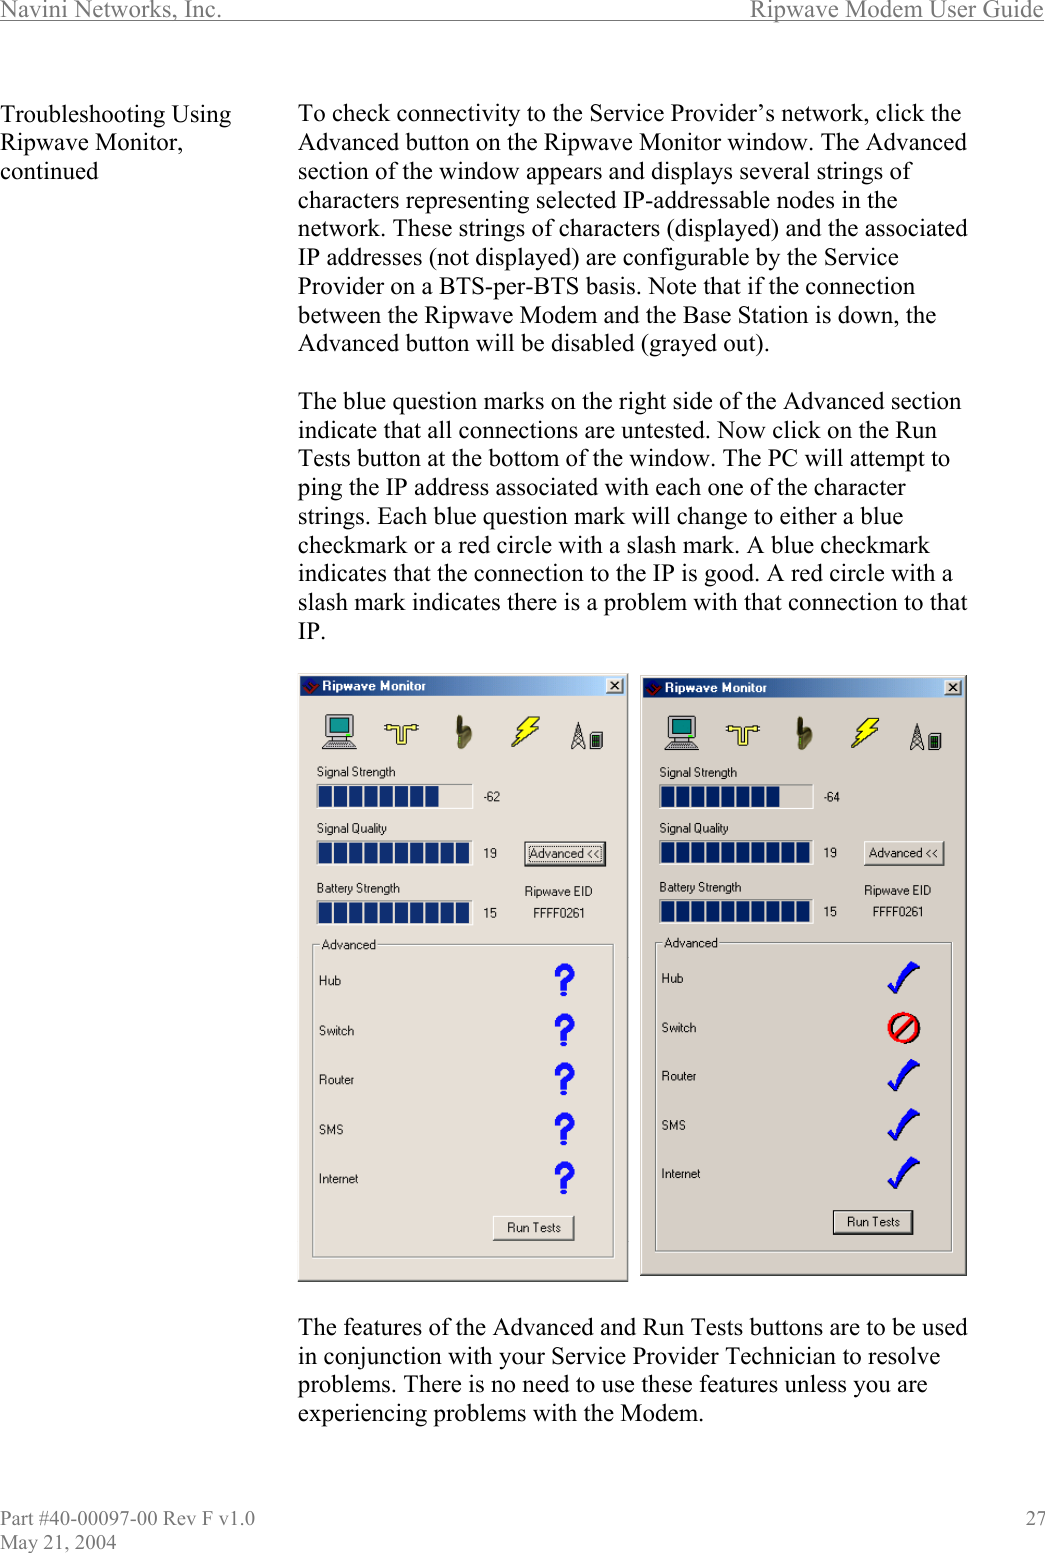 Navini Networks, Inc.        Ripwave Modem User Guide Troubleshooting Using Ripwave Monitor, continued            To check connectivity to the Service Provider’s network, click the Advanced button on the Ripwave Monitor window. The Advanced section of the window appears and displays several strings of characters representing selected IP-addressable nodes in the network. These strings of characters (displayed) and the associated IP addresses (not displayed) are configurable by the Service Provider on a BTS-per-BTS basis. Note that if the connection between the Ripwave Modem and the Base Station is down, the Advanced button will be disabled (grayed out).  The blue question marks on the right side of the Advanced section indicate that all connections are untested. Now click on the Run Tests button at the bottom of the window. The PC will attempt to ping the IP address associated with each one of the character rings. Each blue question mark will change to either a blue heckmark or a red circle with a slash mark. A blue checkmark dicates that the connection to the IP is good. A red circle with a ash mark indicates there is a problem with that connection to that .  ve                                 stcinslIP  The features of the Advanced and Run Tests buttons are to be used in conjunction with your Service Provider Technician to resolproblems. There is no need to use these features unless you are experiencing problems with the Modem.   Part #40-00097-00 Rev F v1.0                                          27 May 21, 2004 